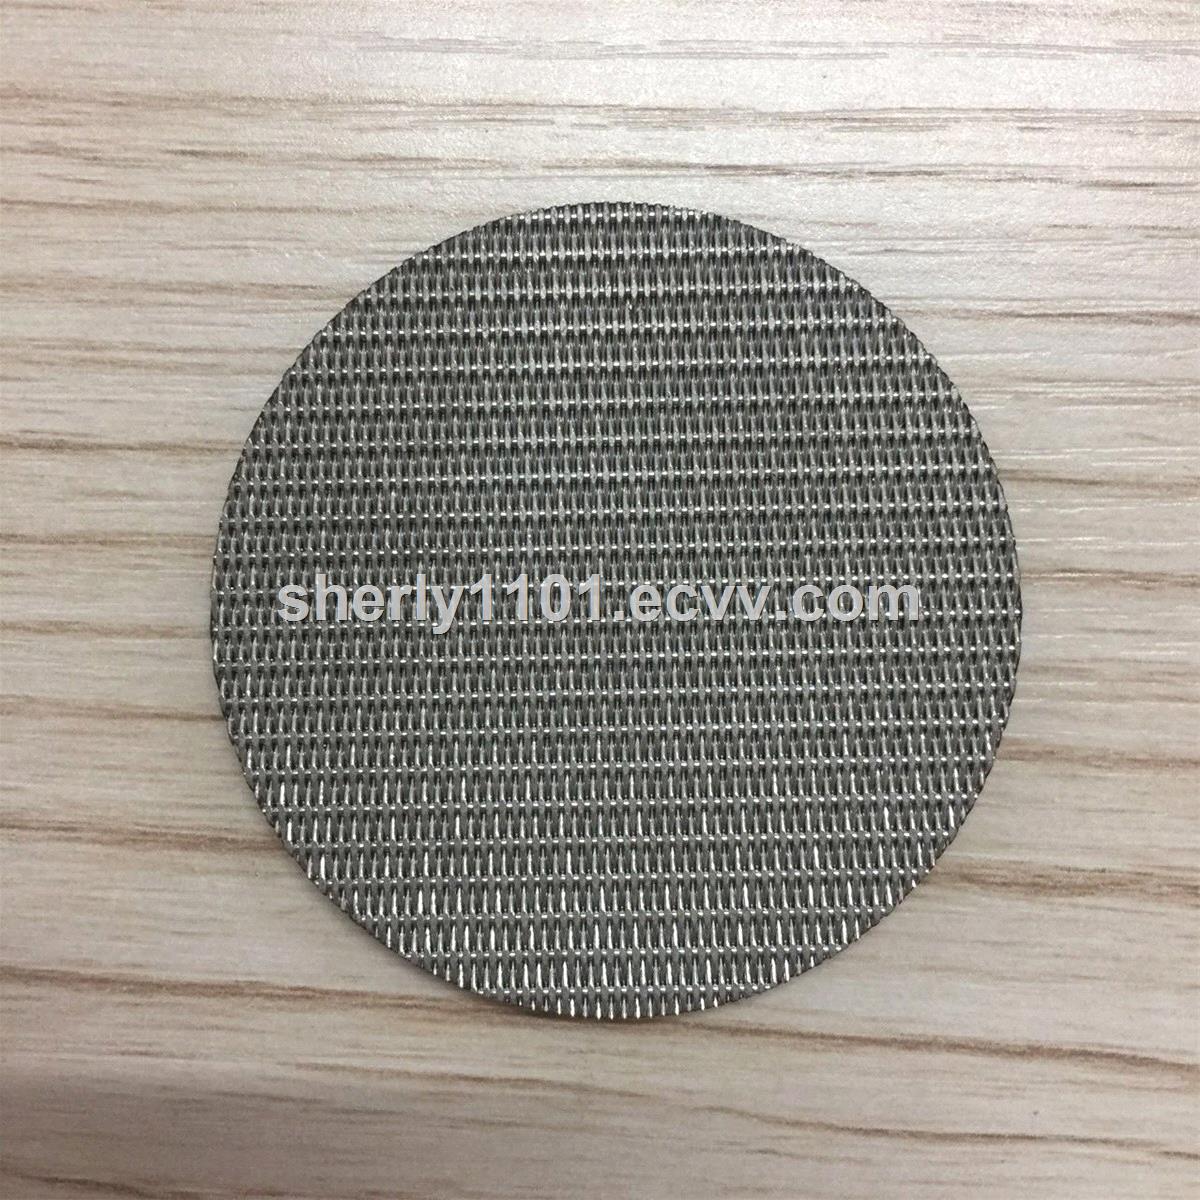 Stainless steel sintered woven wire mesh filter mesh with perforated palte laminated